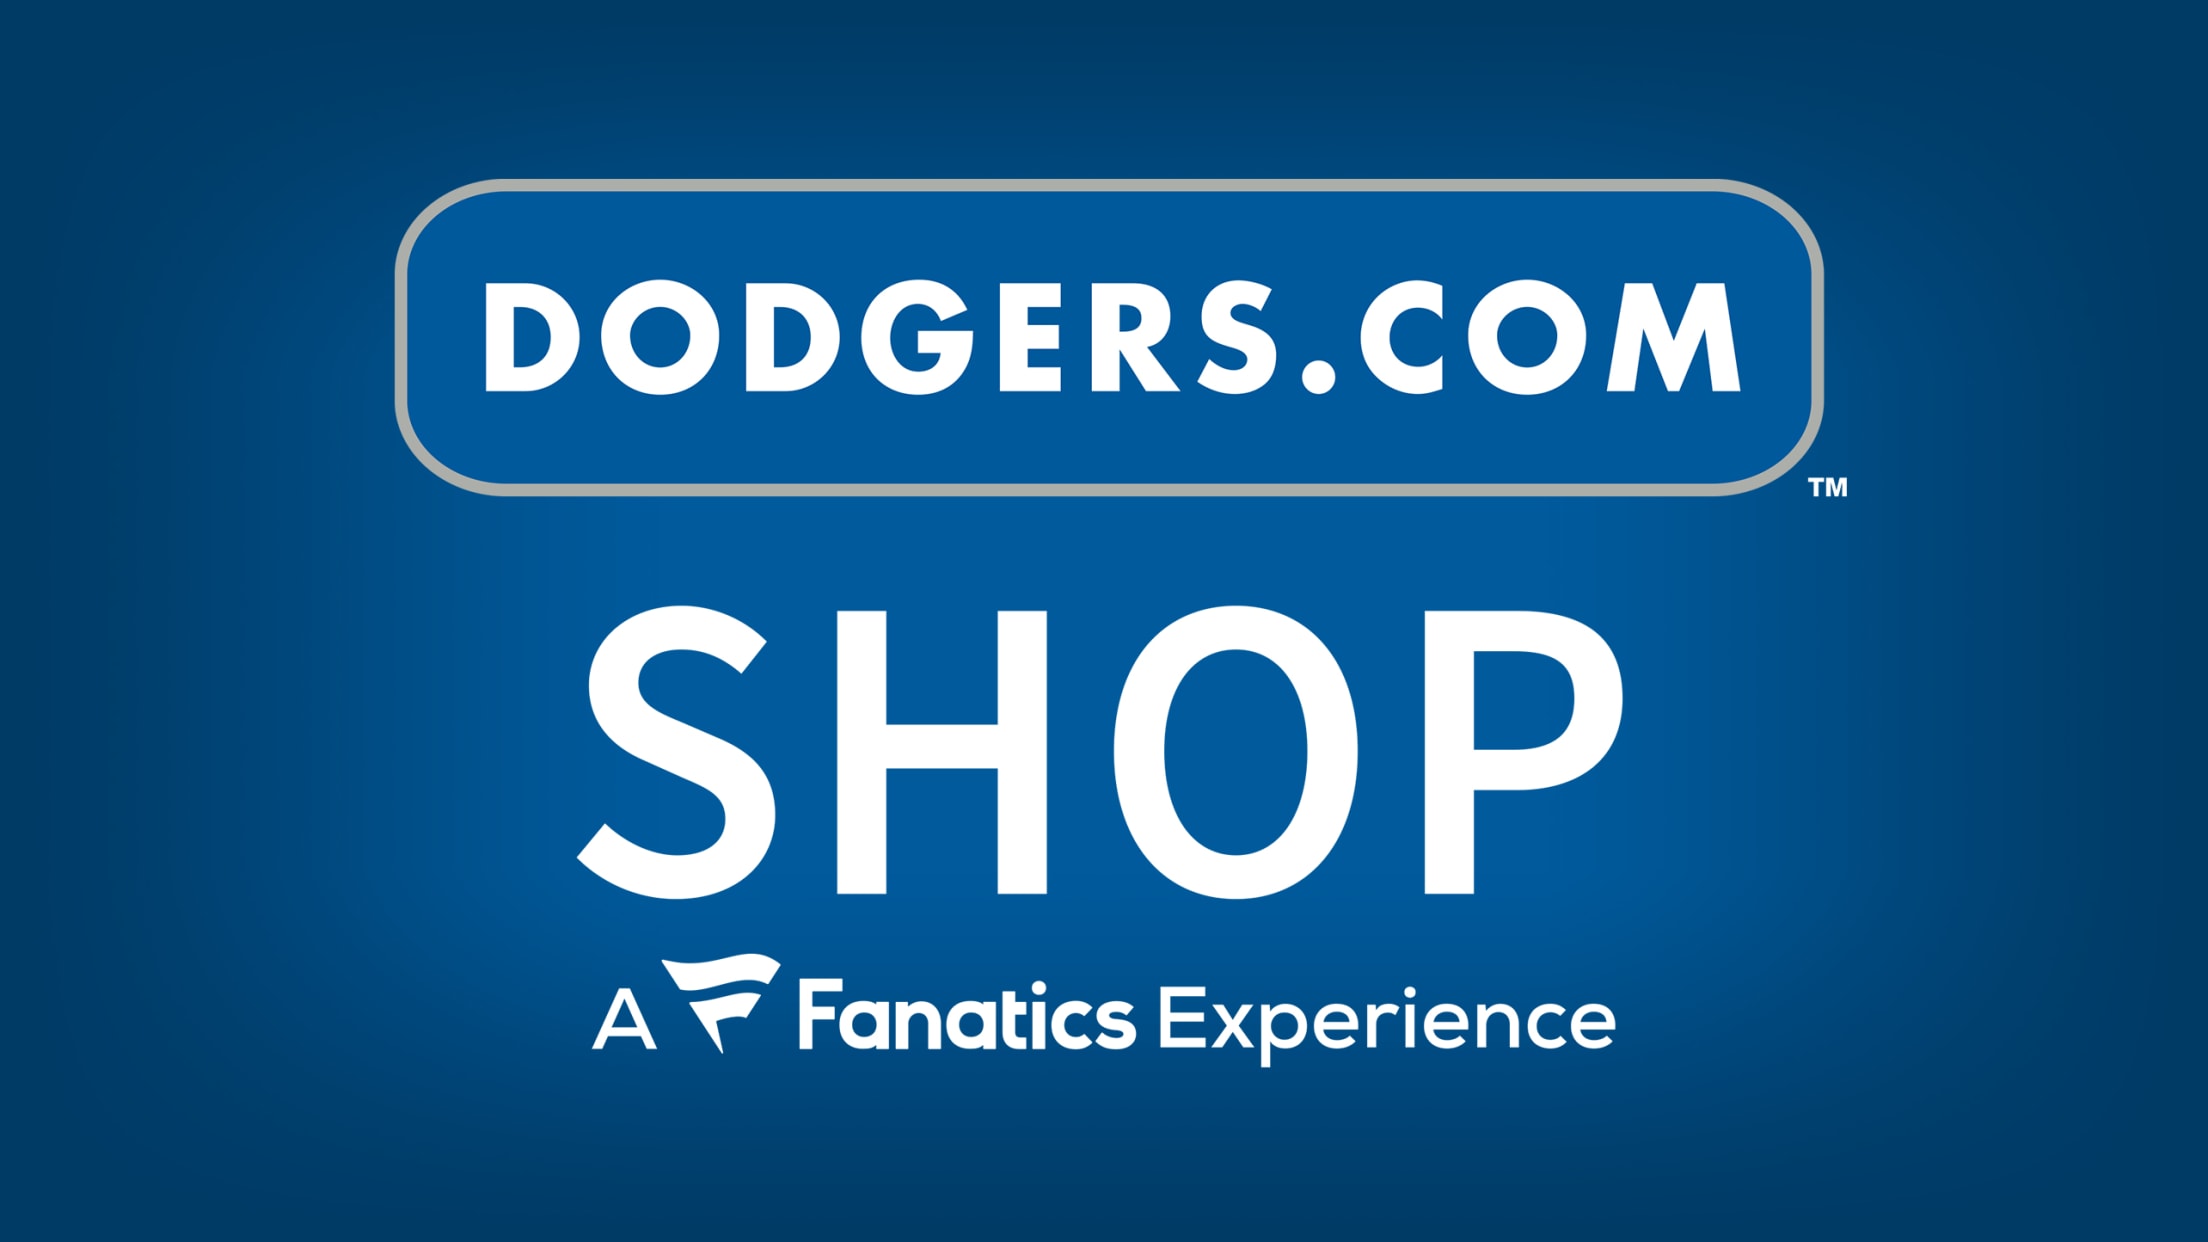 Dodgers' 2015 Spring Training schedule unveiled – Dodger Thoughts